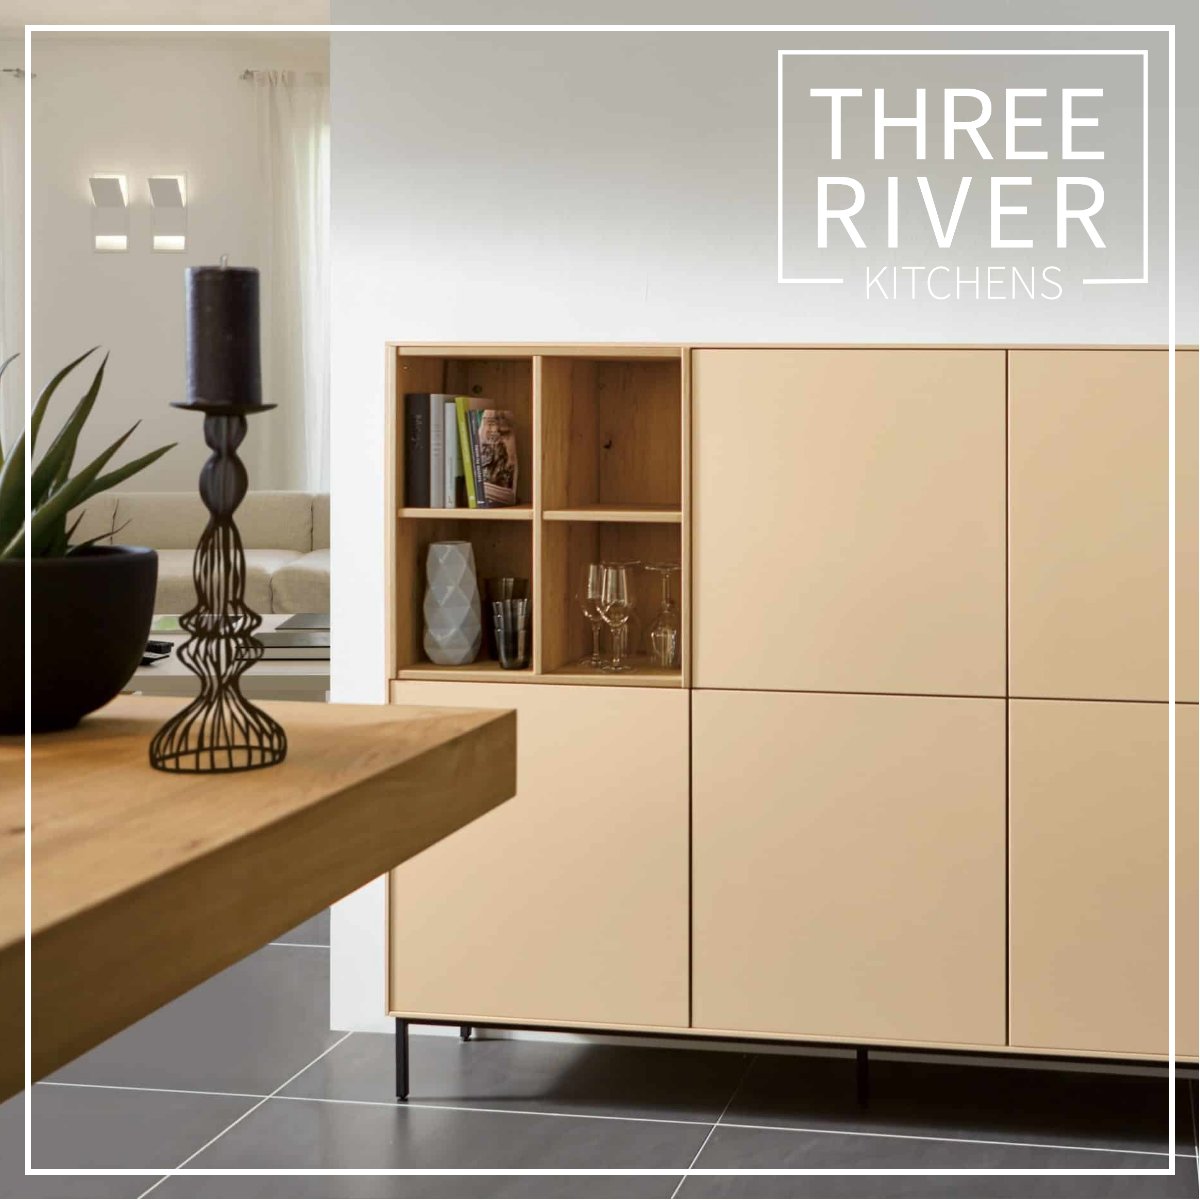 Discover the art of modern kitchen design with Three River Kitchens. Sleek lines, and innovative features. Book your consultation today!  #kitchenideas #kitchendesignideas #kitchendesigner #kitchendesigners #kitchendesigntrends #essexbusiness #essexkitchens #chelmsfordbusiness